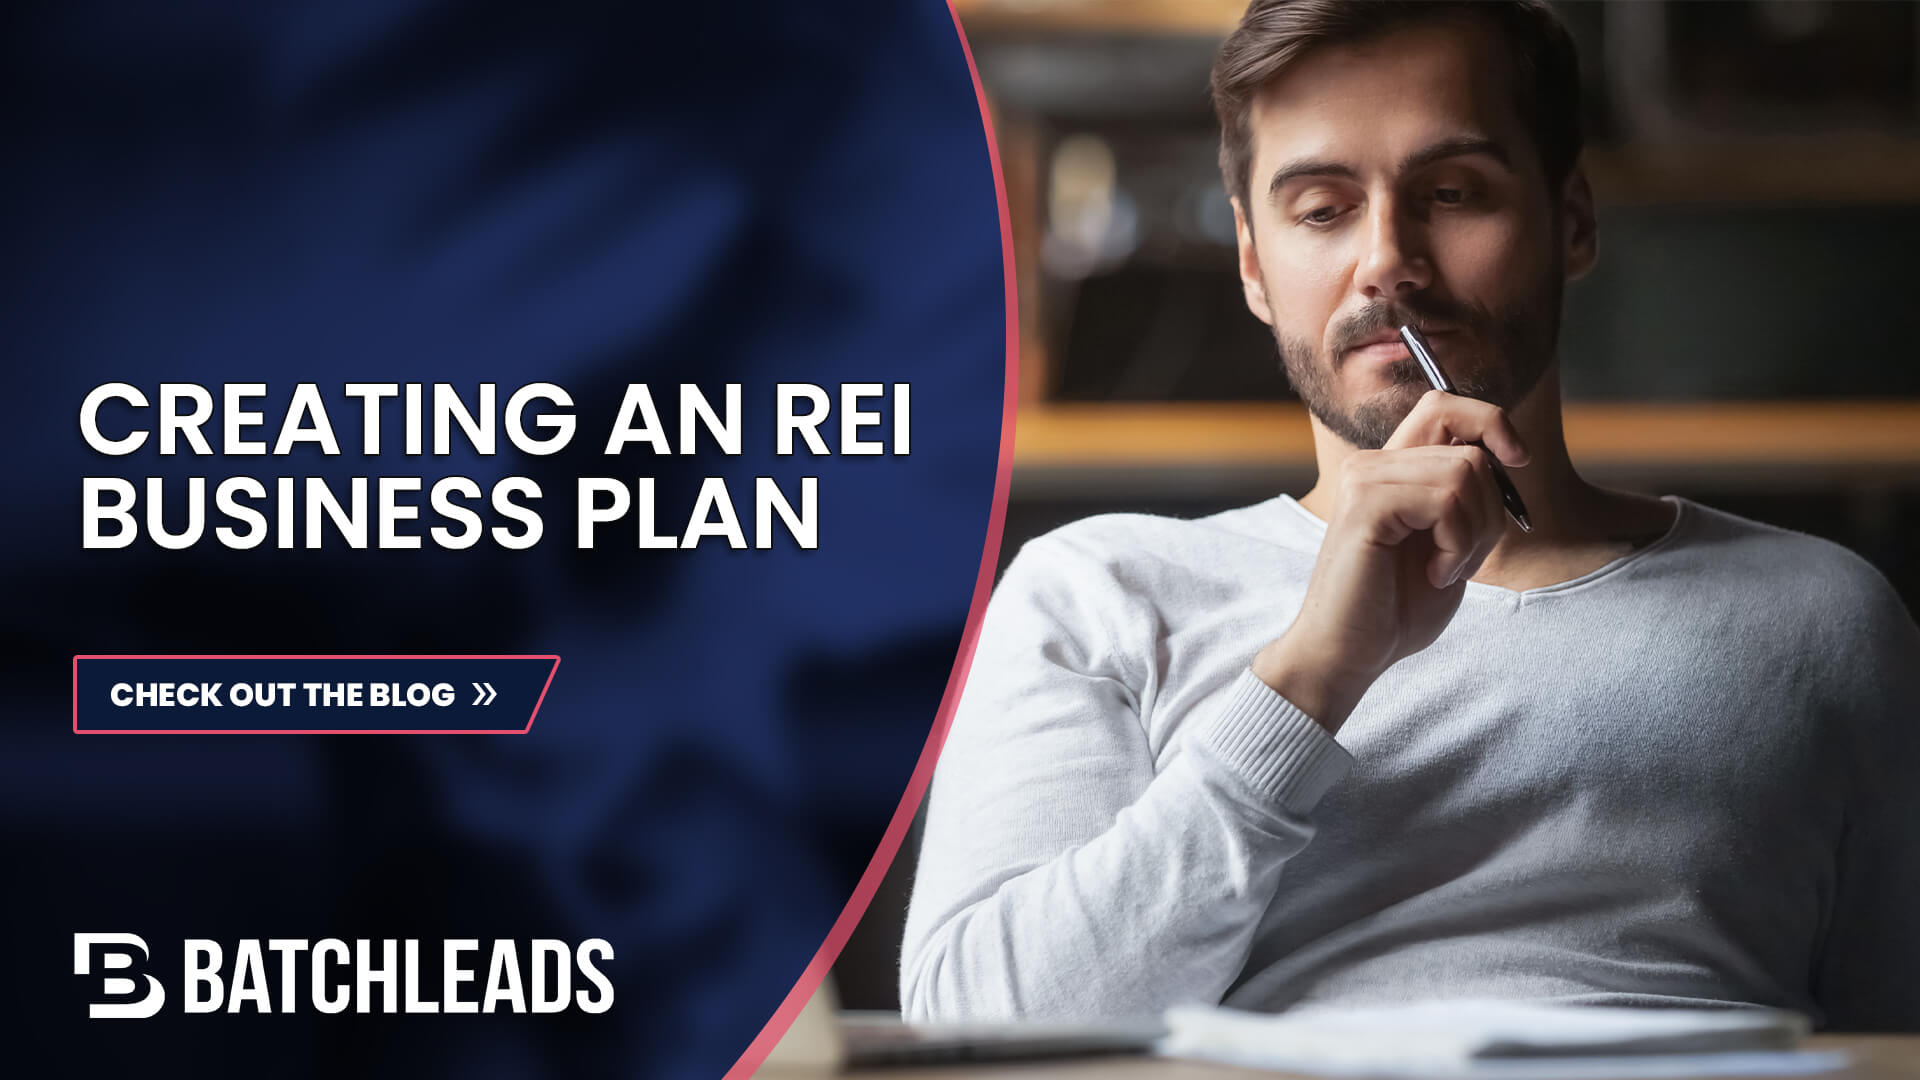 How to create an REI business plan